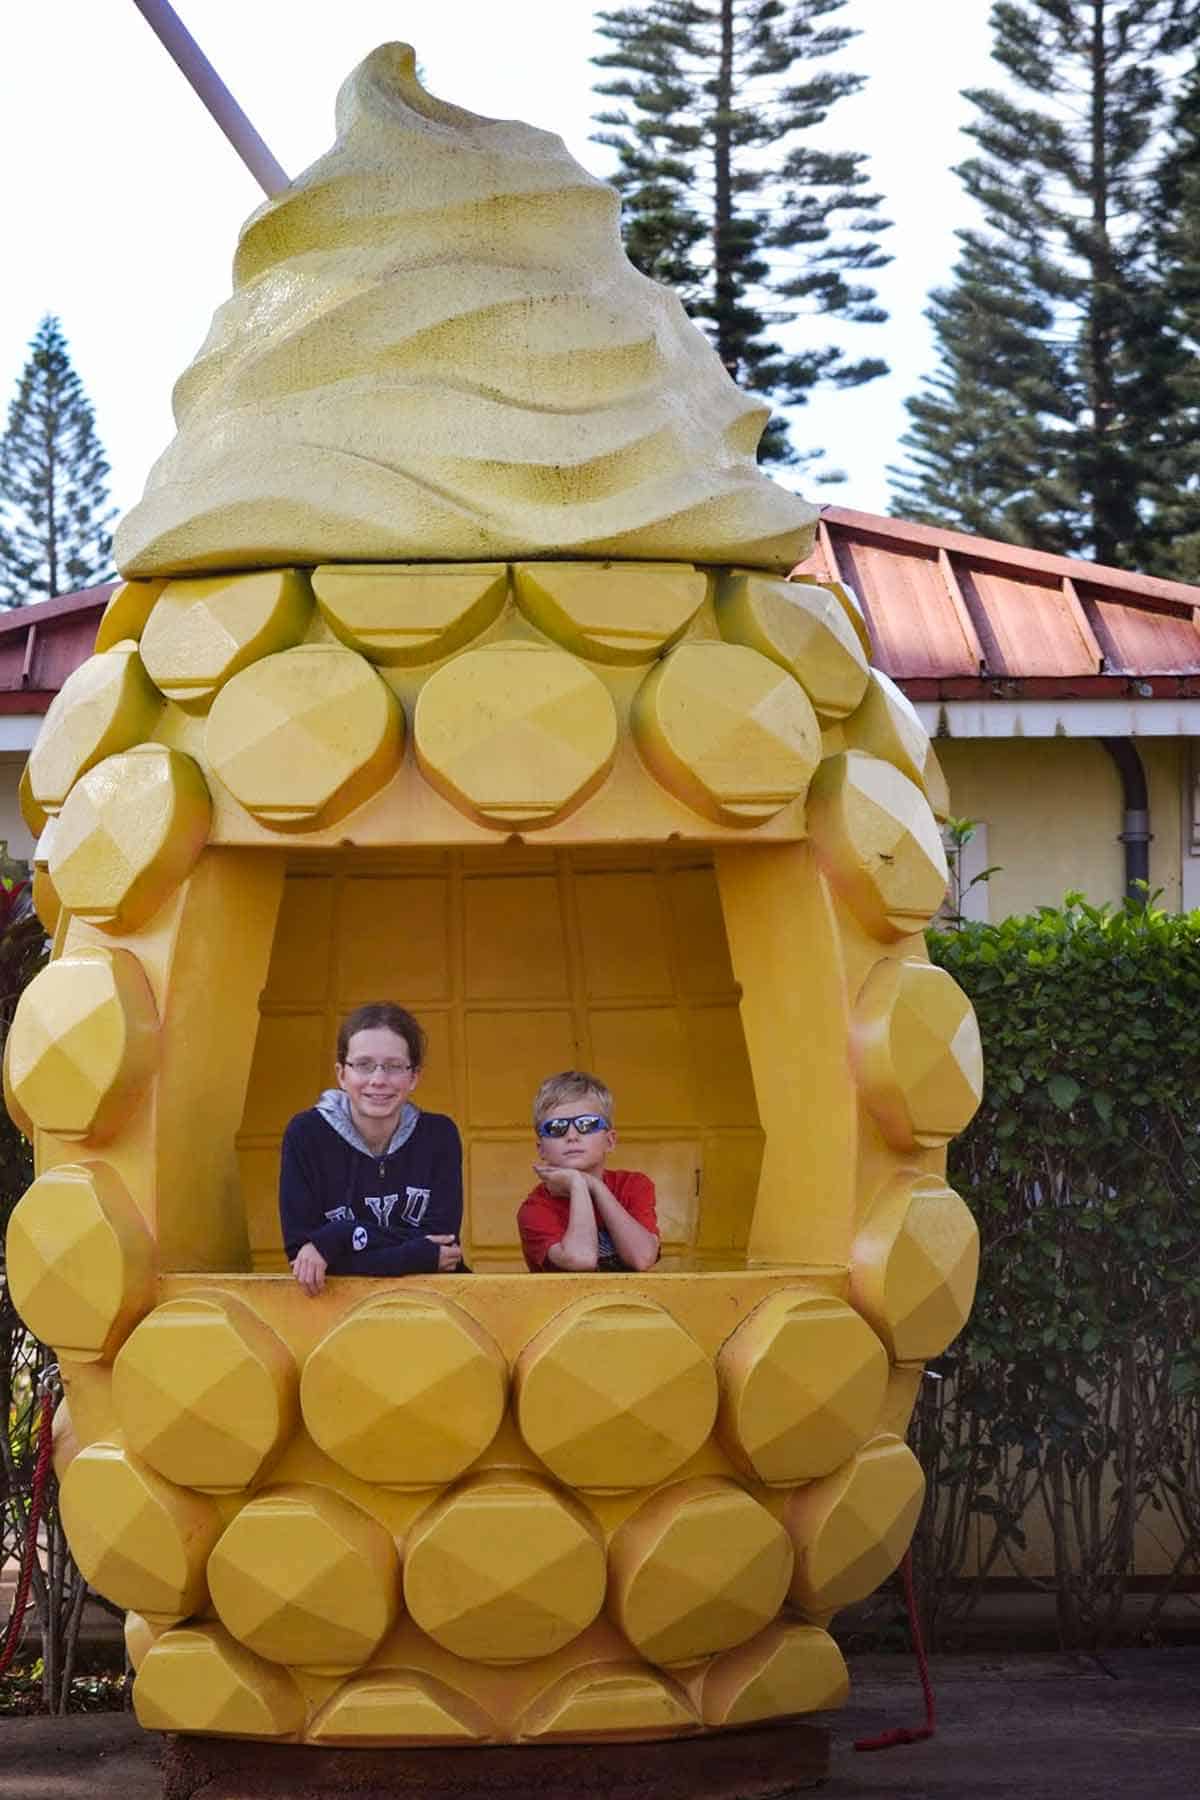 Two children in a pineapple sculpture at Dole Pineapple tour in Hawaii.